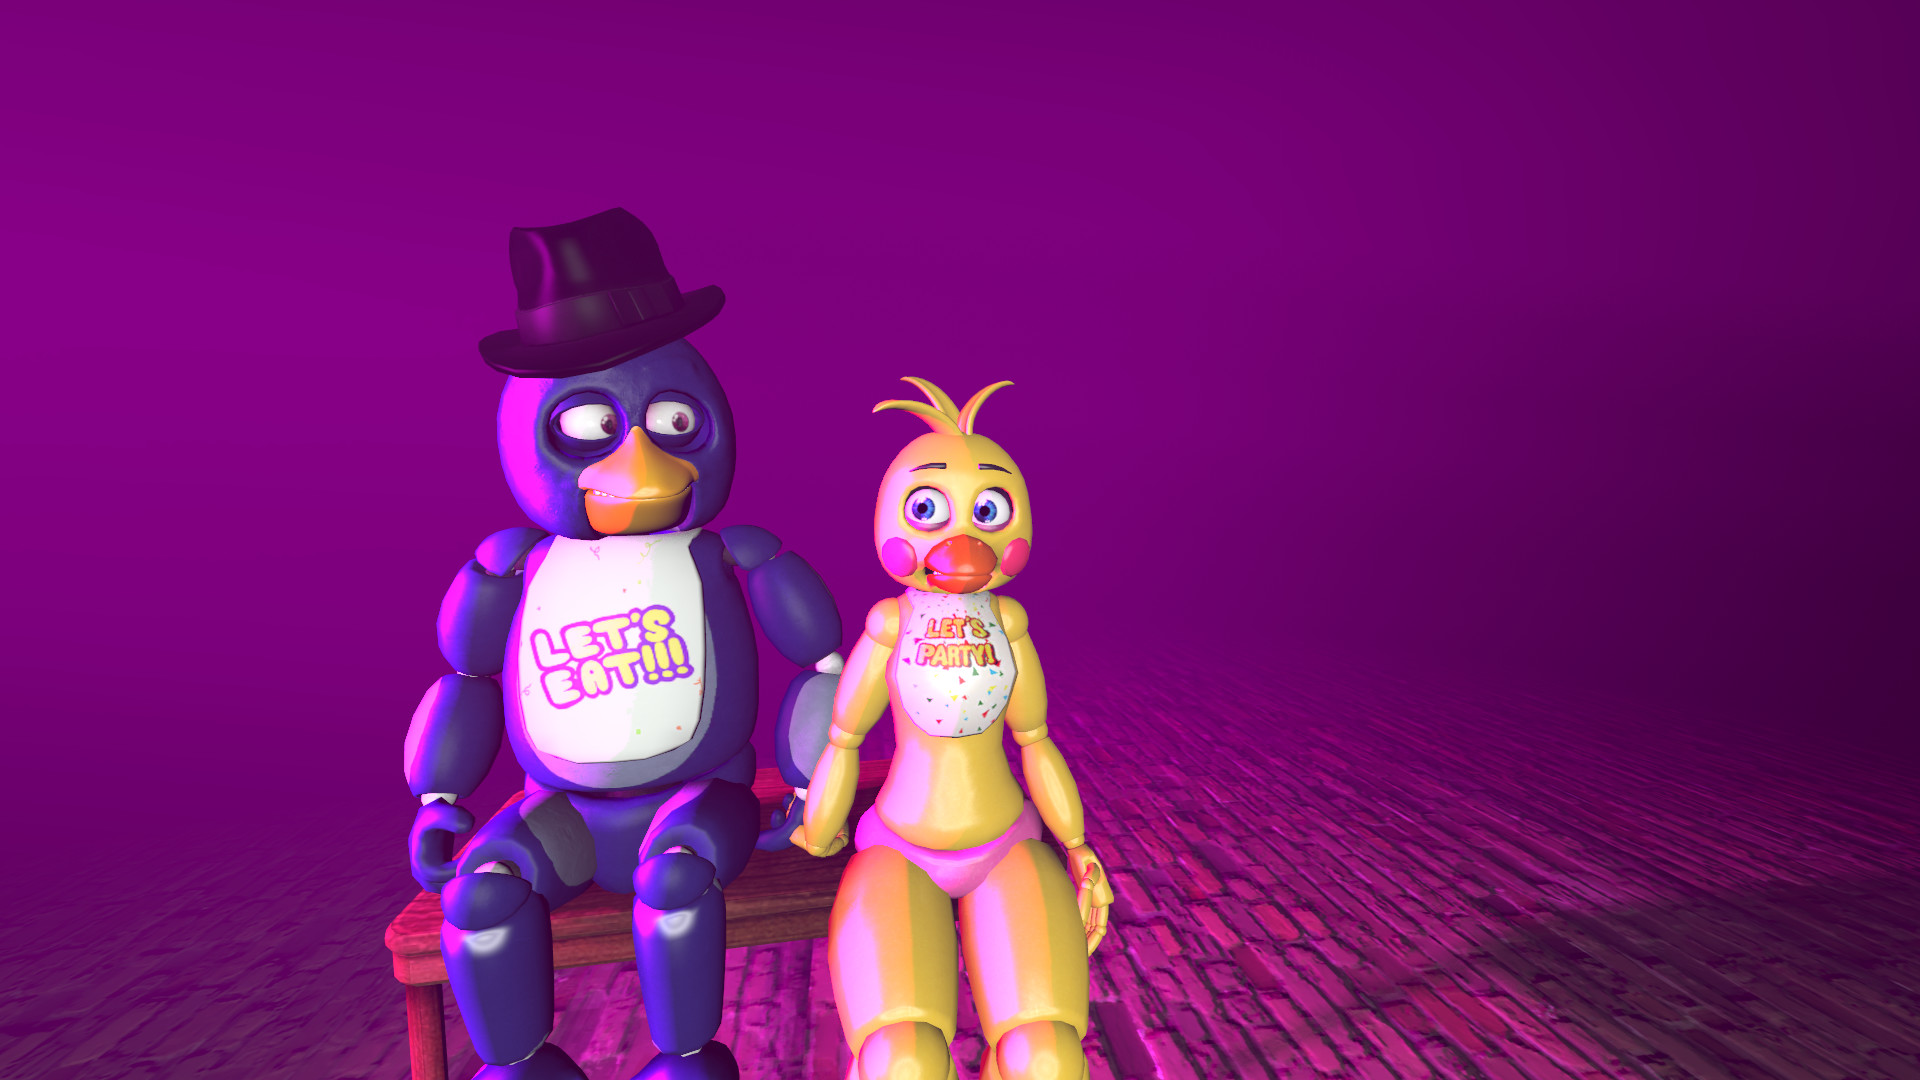 1920x1080 ... Edward X Toy Chica by SuperiorTR